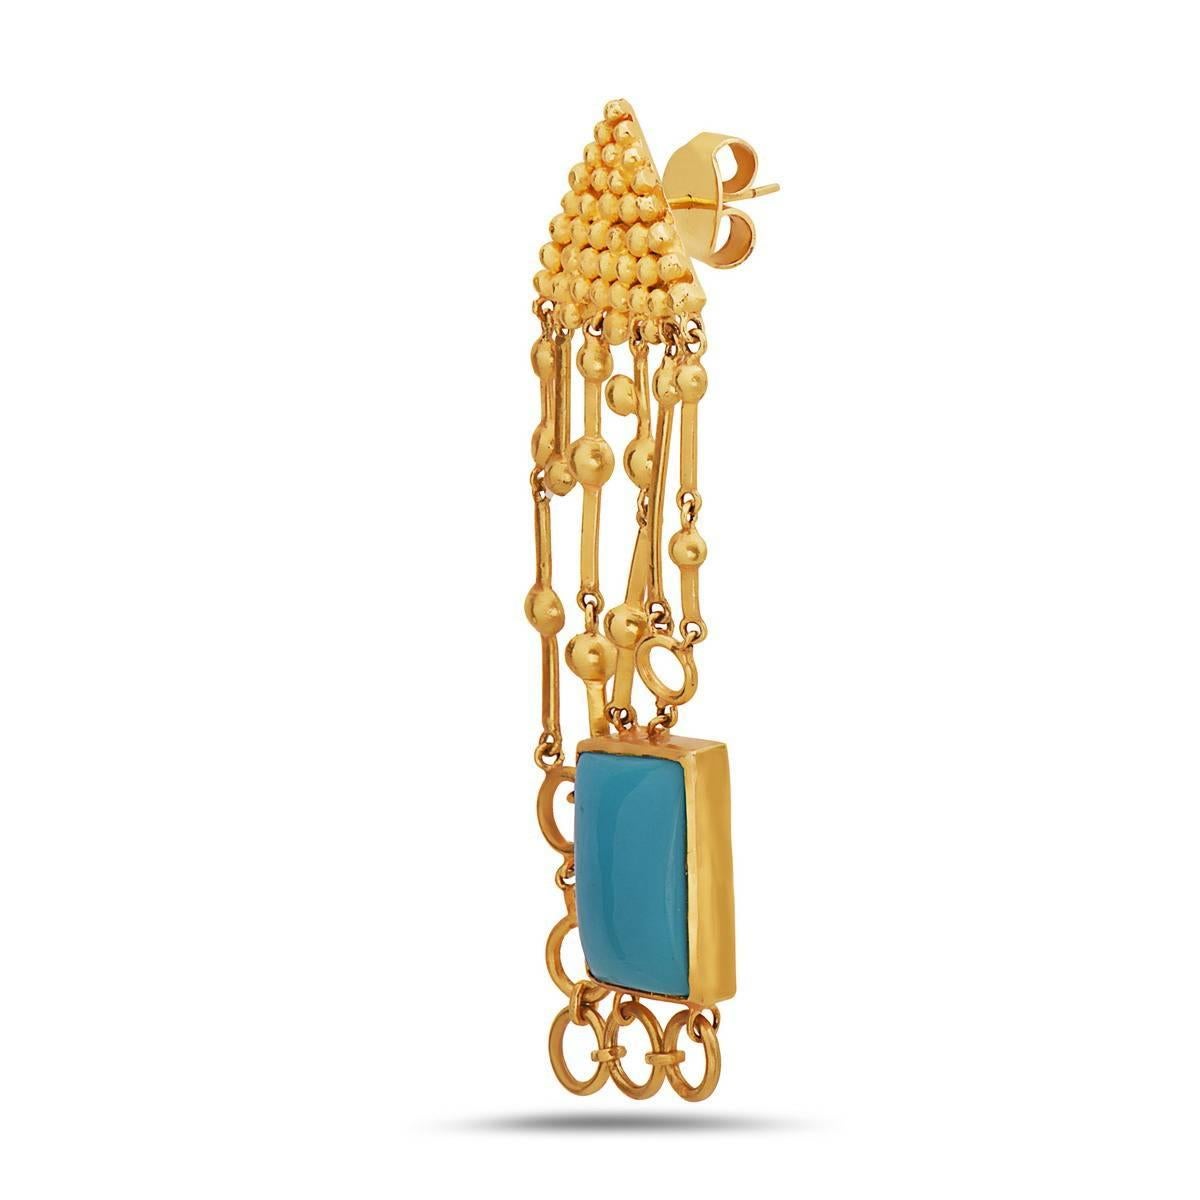 Temple jewelry looking Turquoise Earring made in 18K Gold.

Closure: Push Post

Turquoise: 14.50 cts
Gold: 18K 15.56gms

